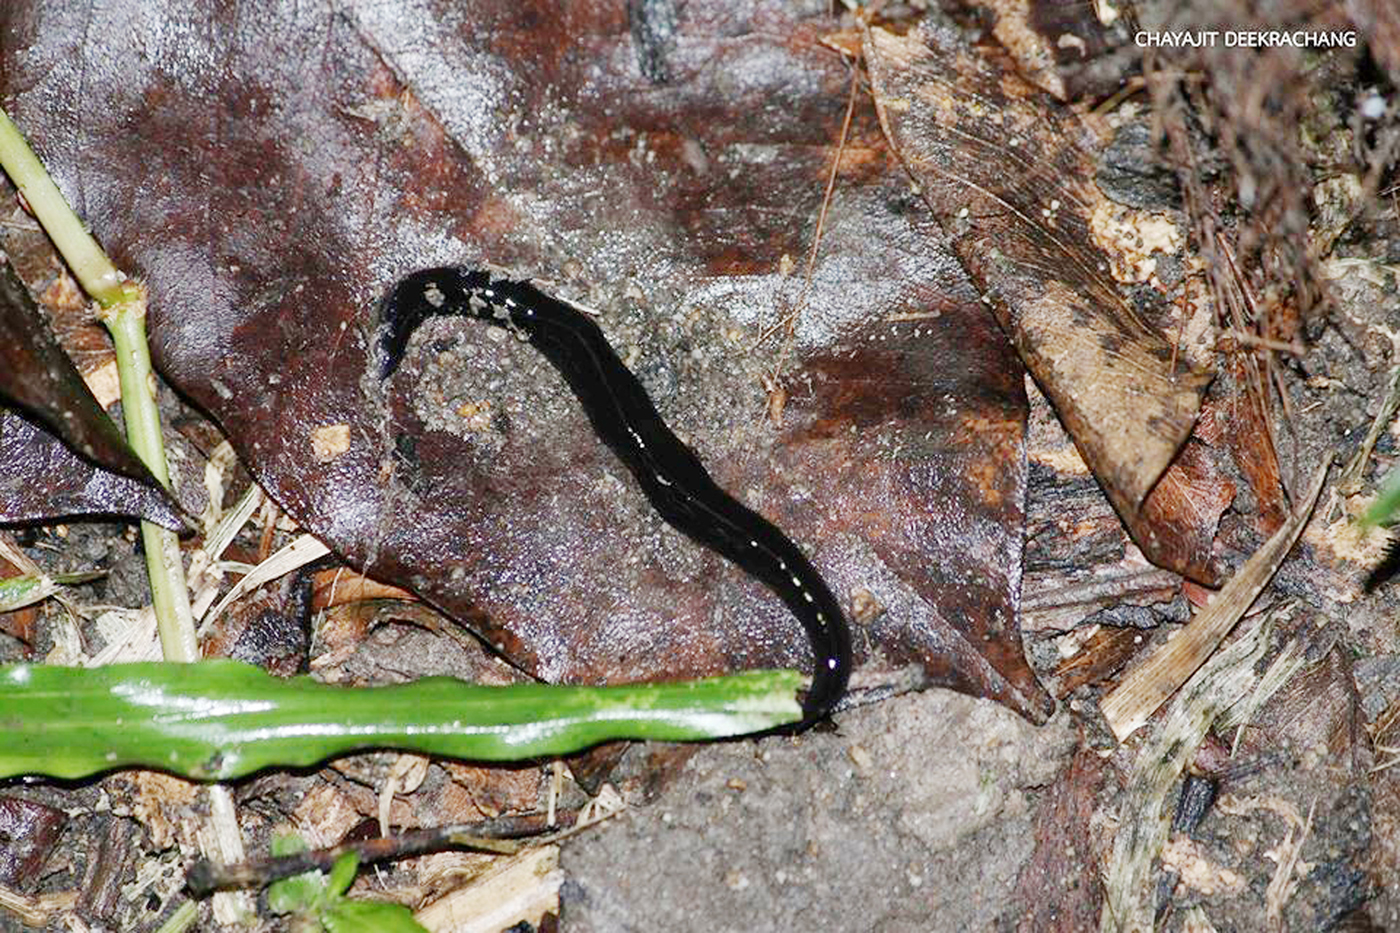 Two new species of Neotropical land flatworms (Platyhelminthes